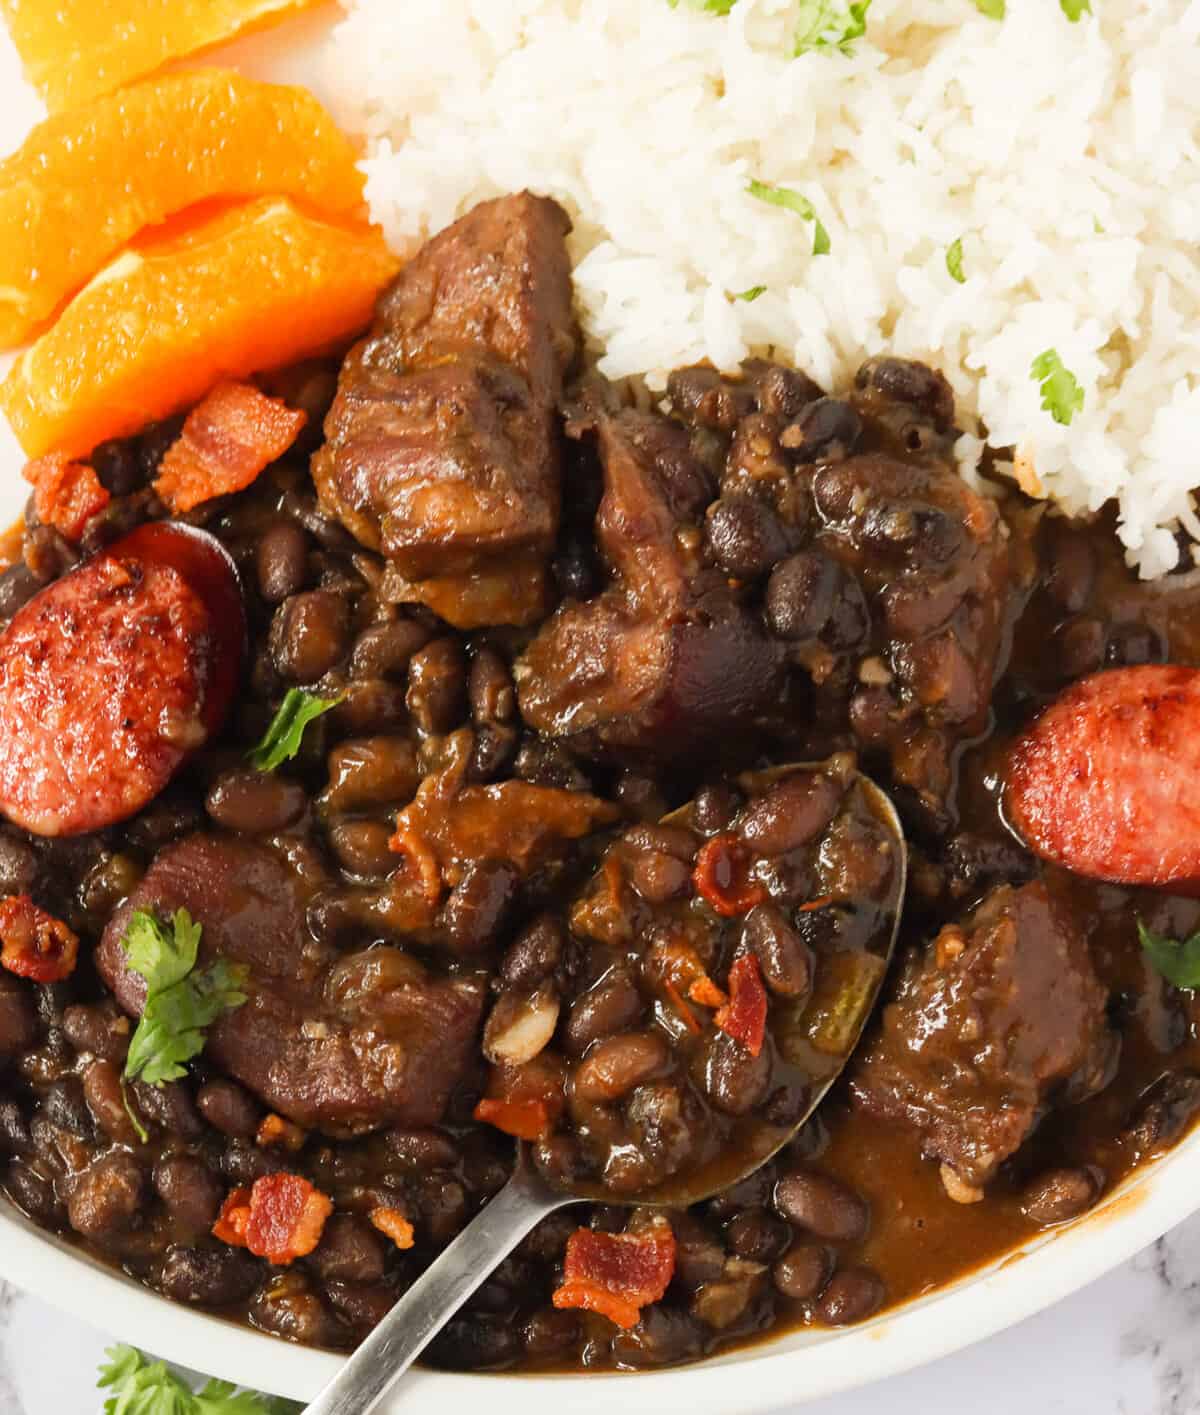 Hearty feijoada served with rice and orange slices